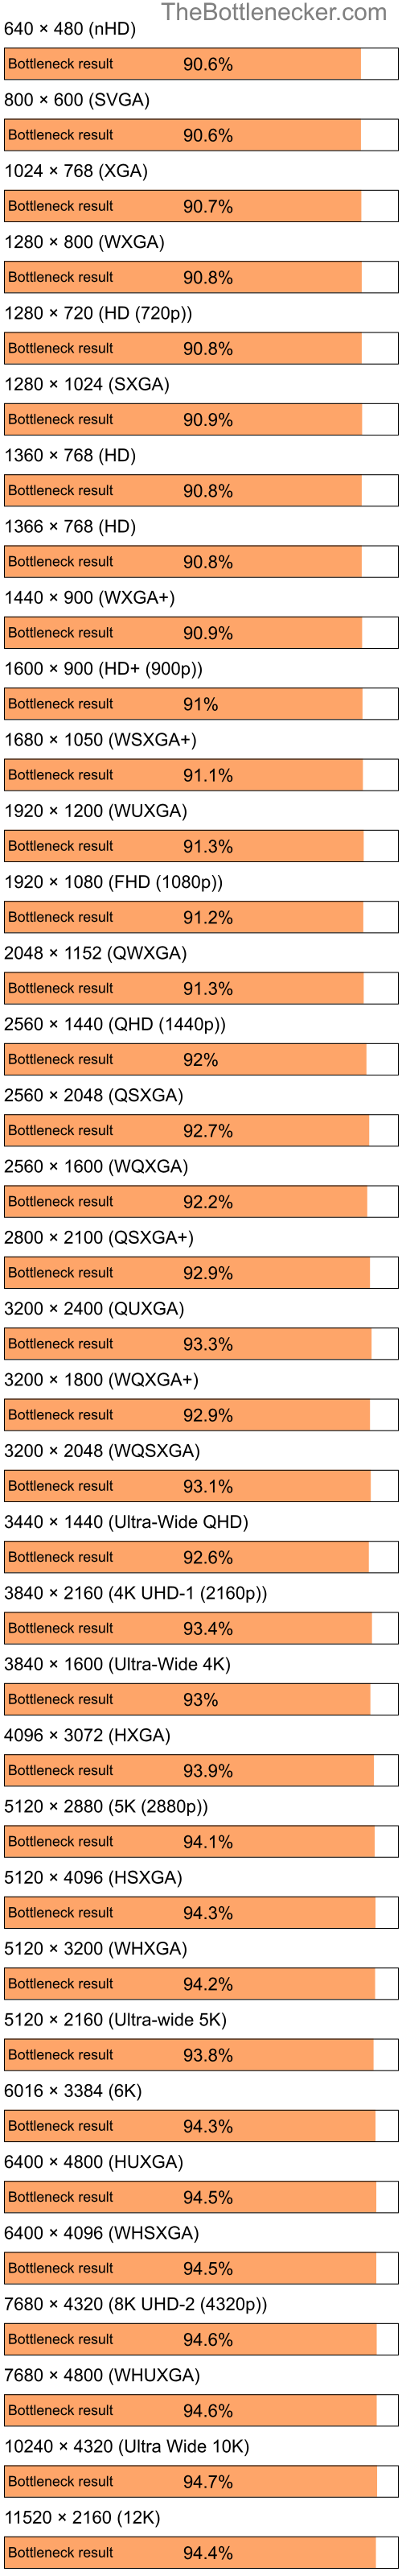 Bottleneck results by resolution for Intel Pentium 4 and NVIDIA GeForce2 MX 100 in General Tasks